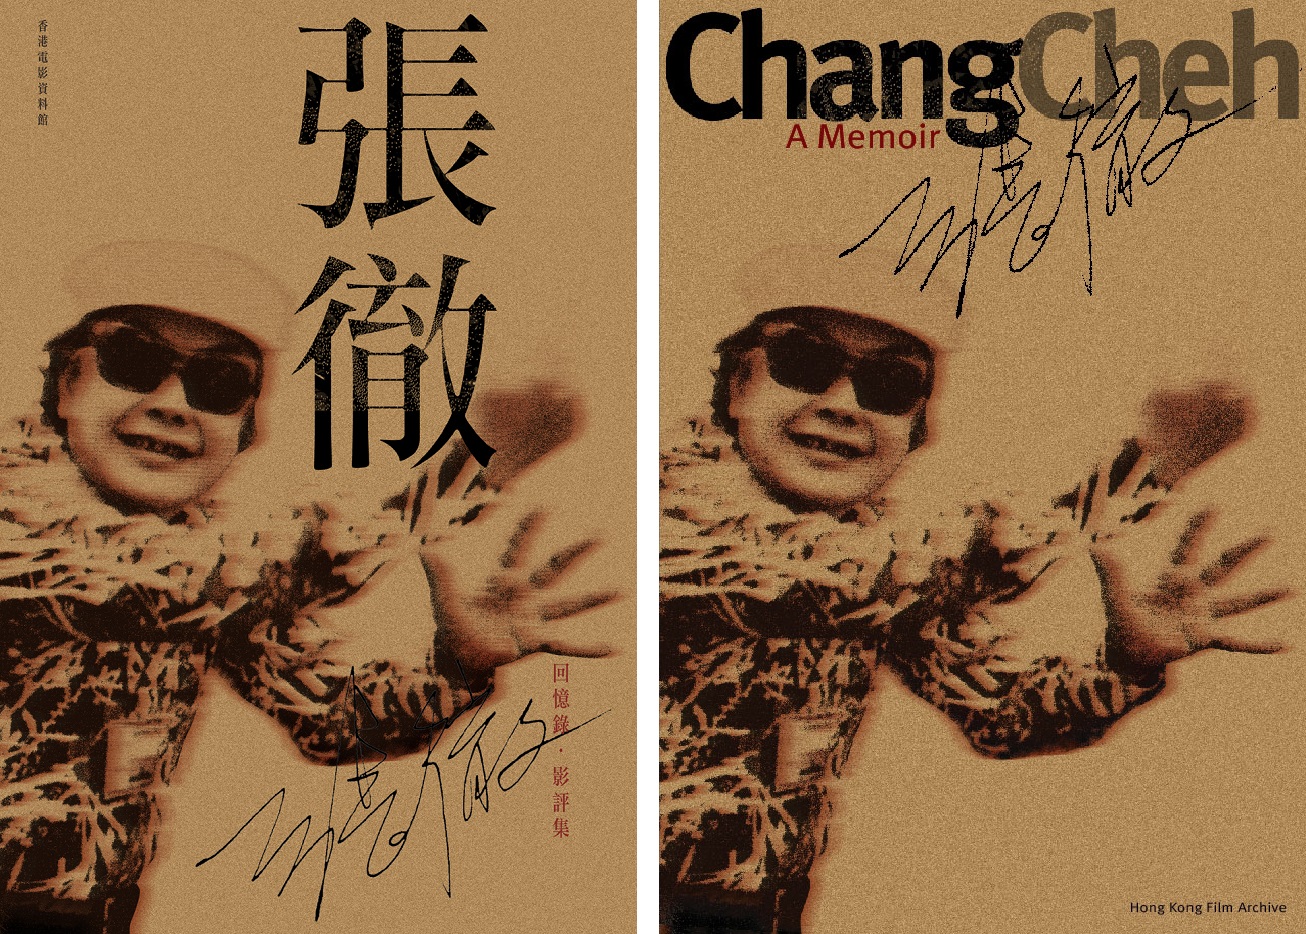 2002: Chang Cheh: A Memoir is published.